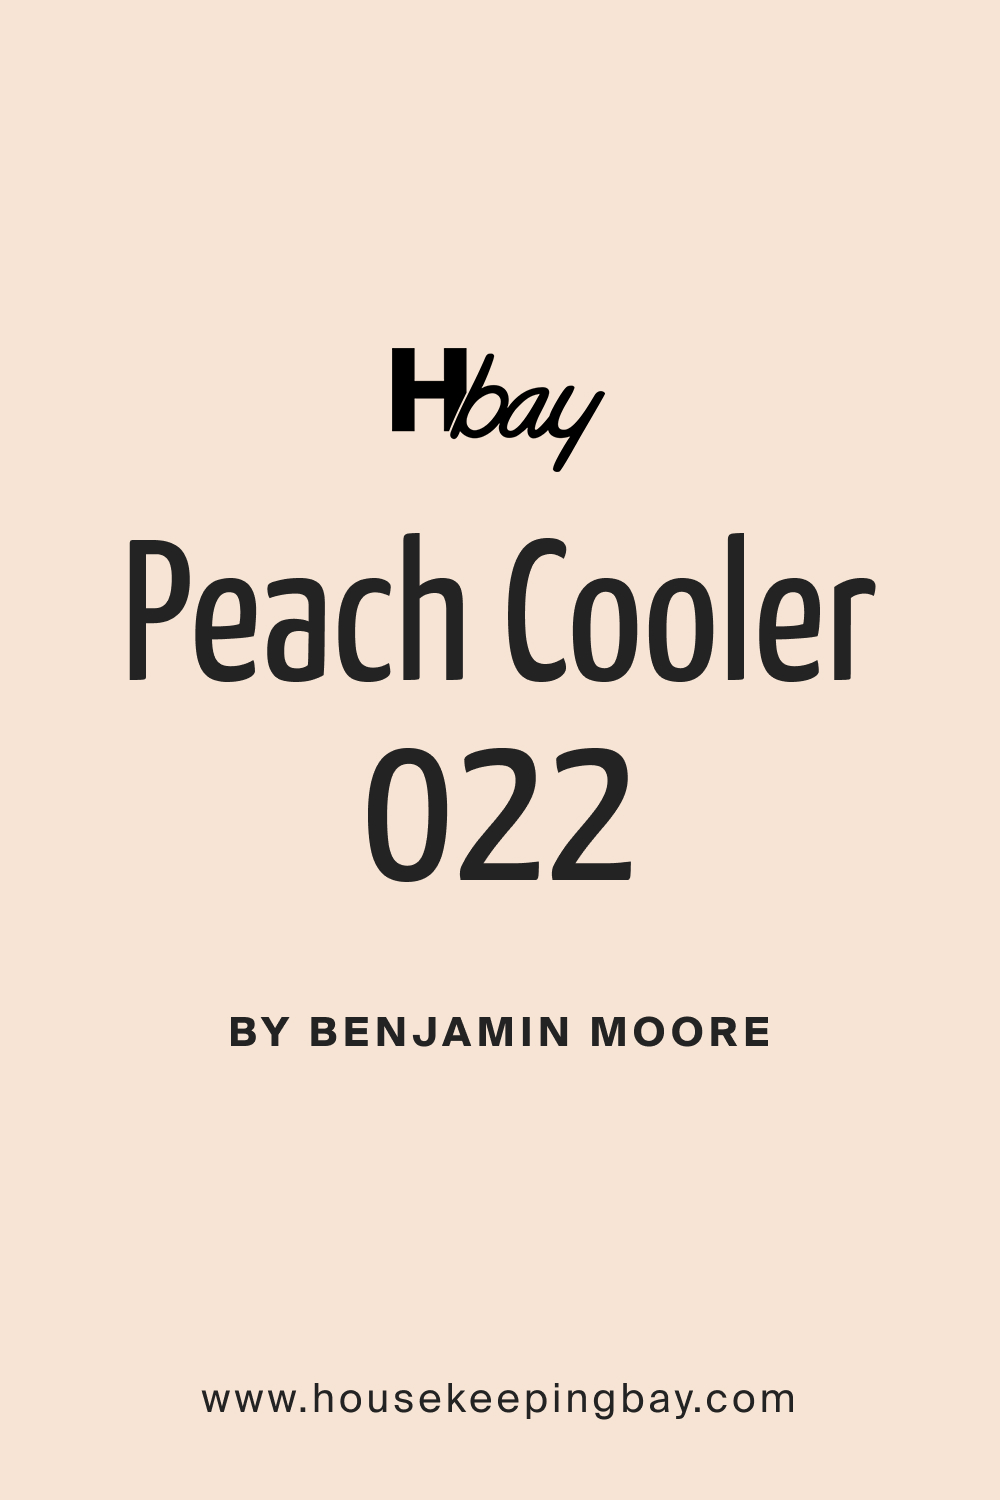 Peach Cooler 022 Paint Color by Benjamin Moore